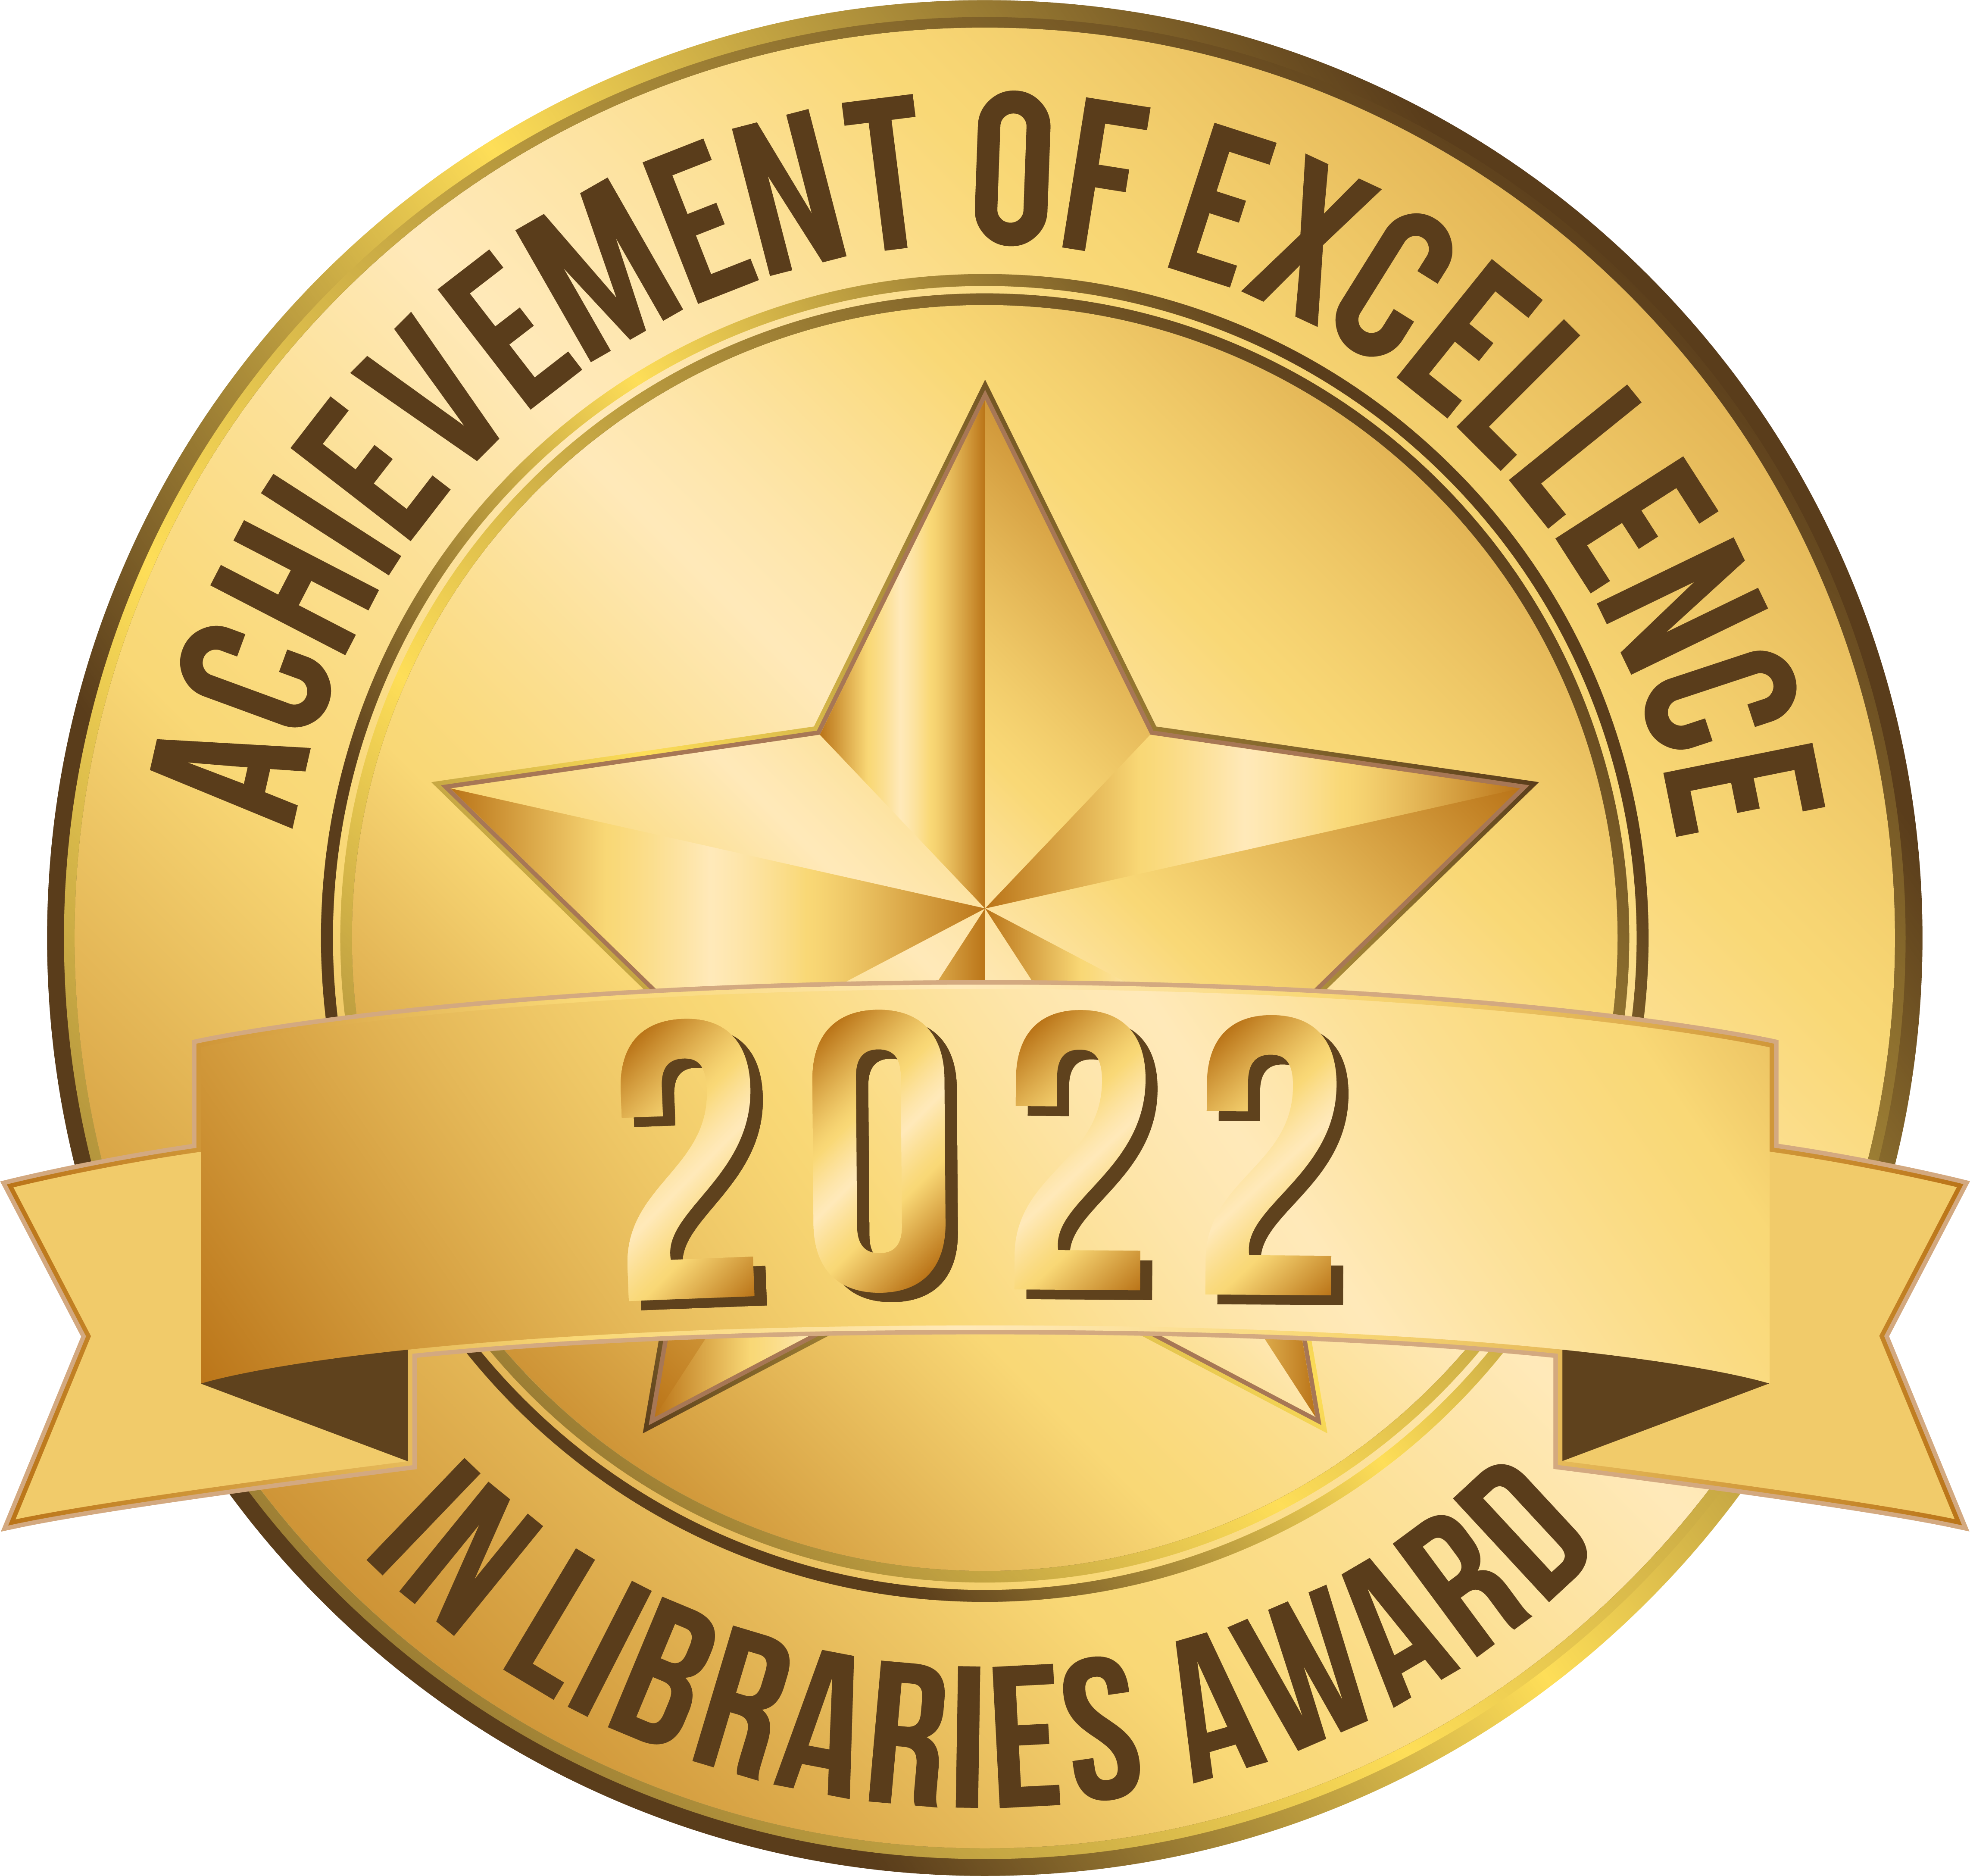 Achievement of Excellence In Libraries Award - 2022 -